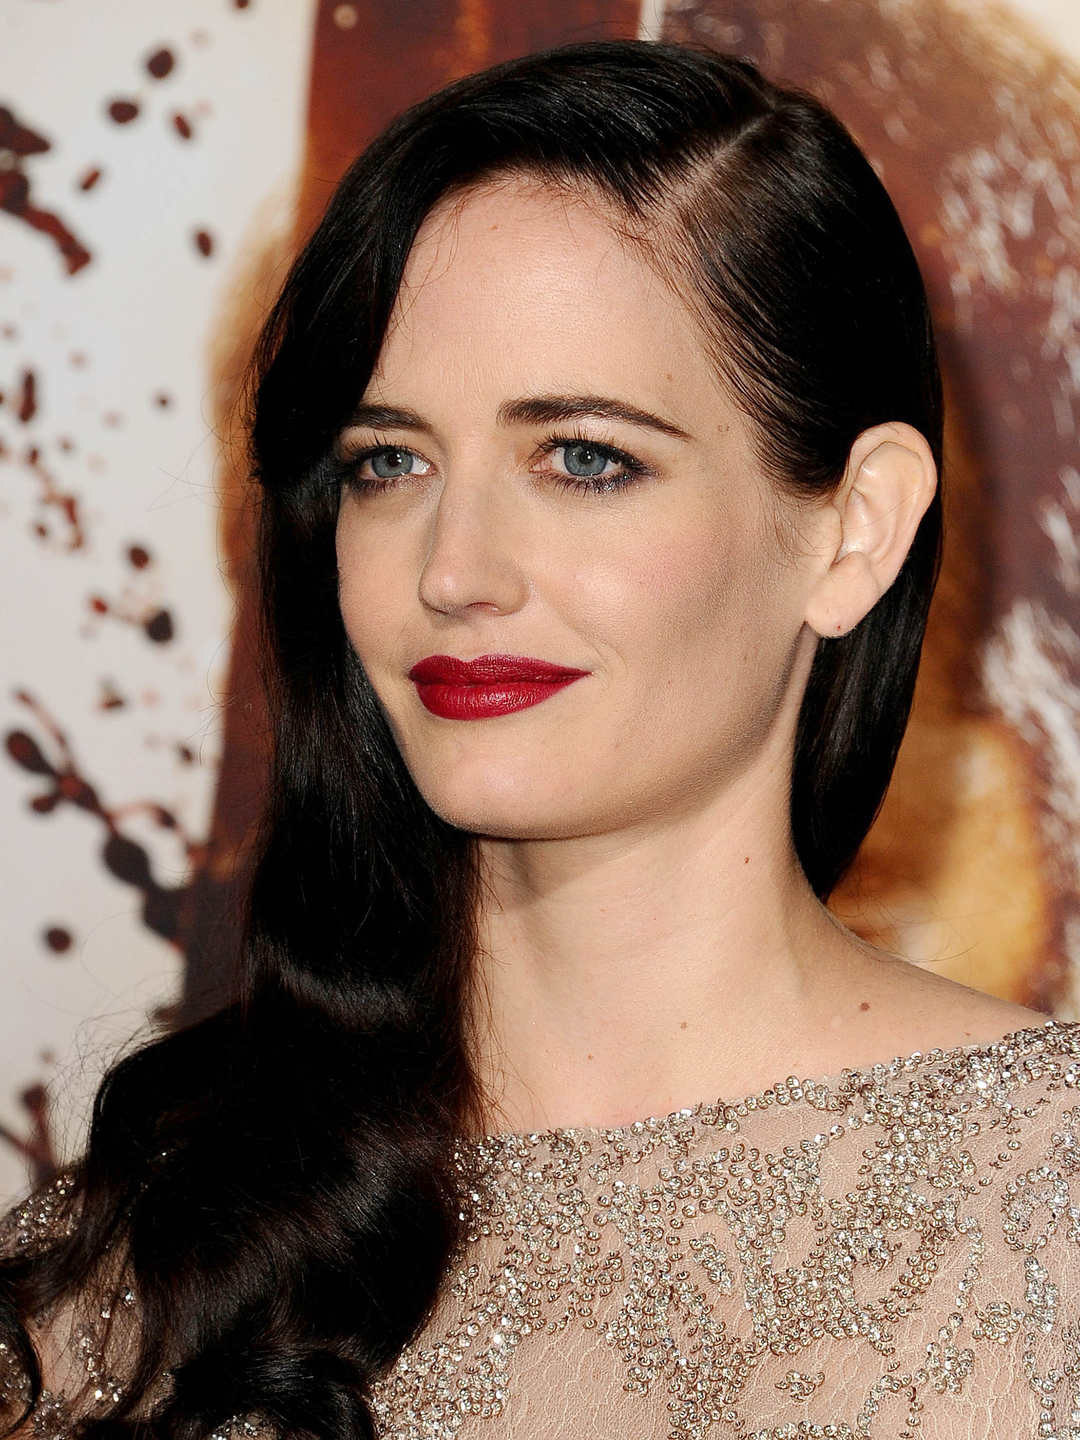 Eva Green who is her mother